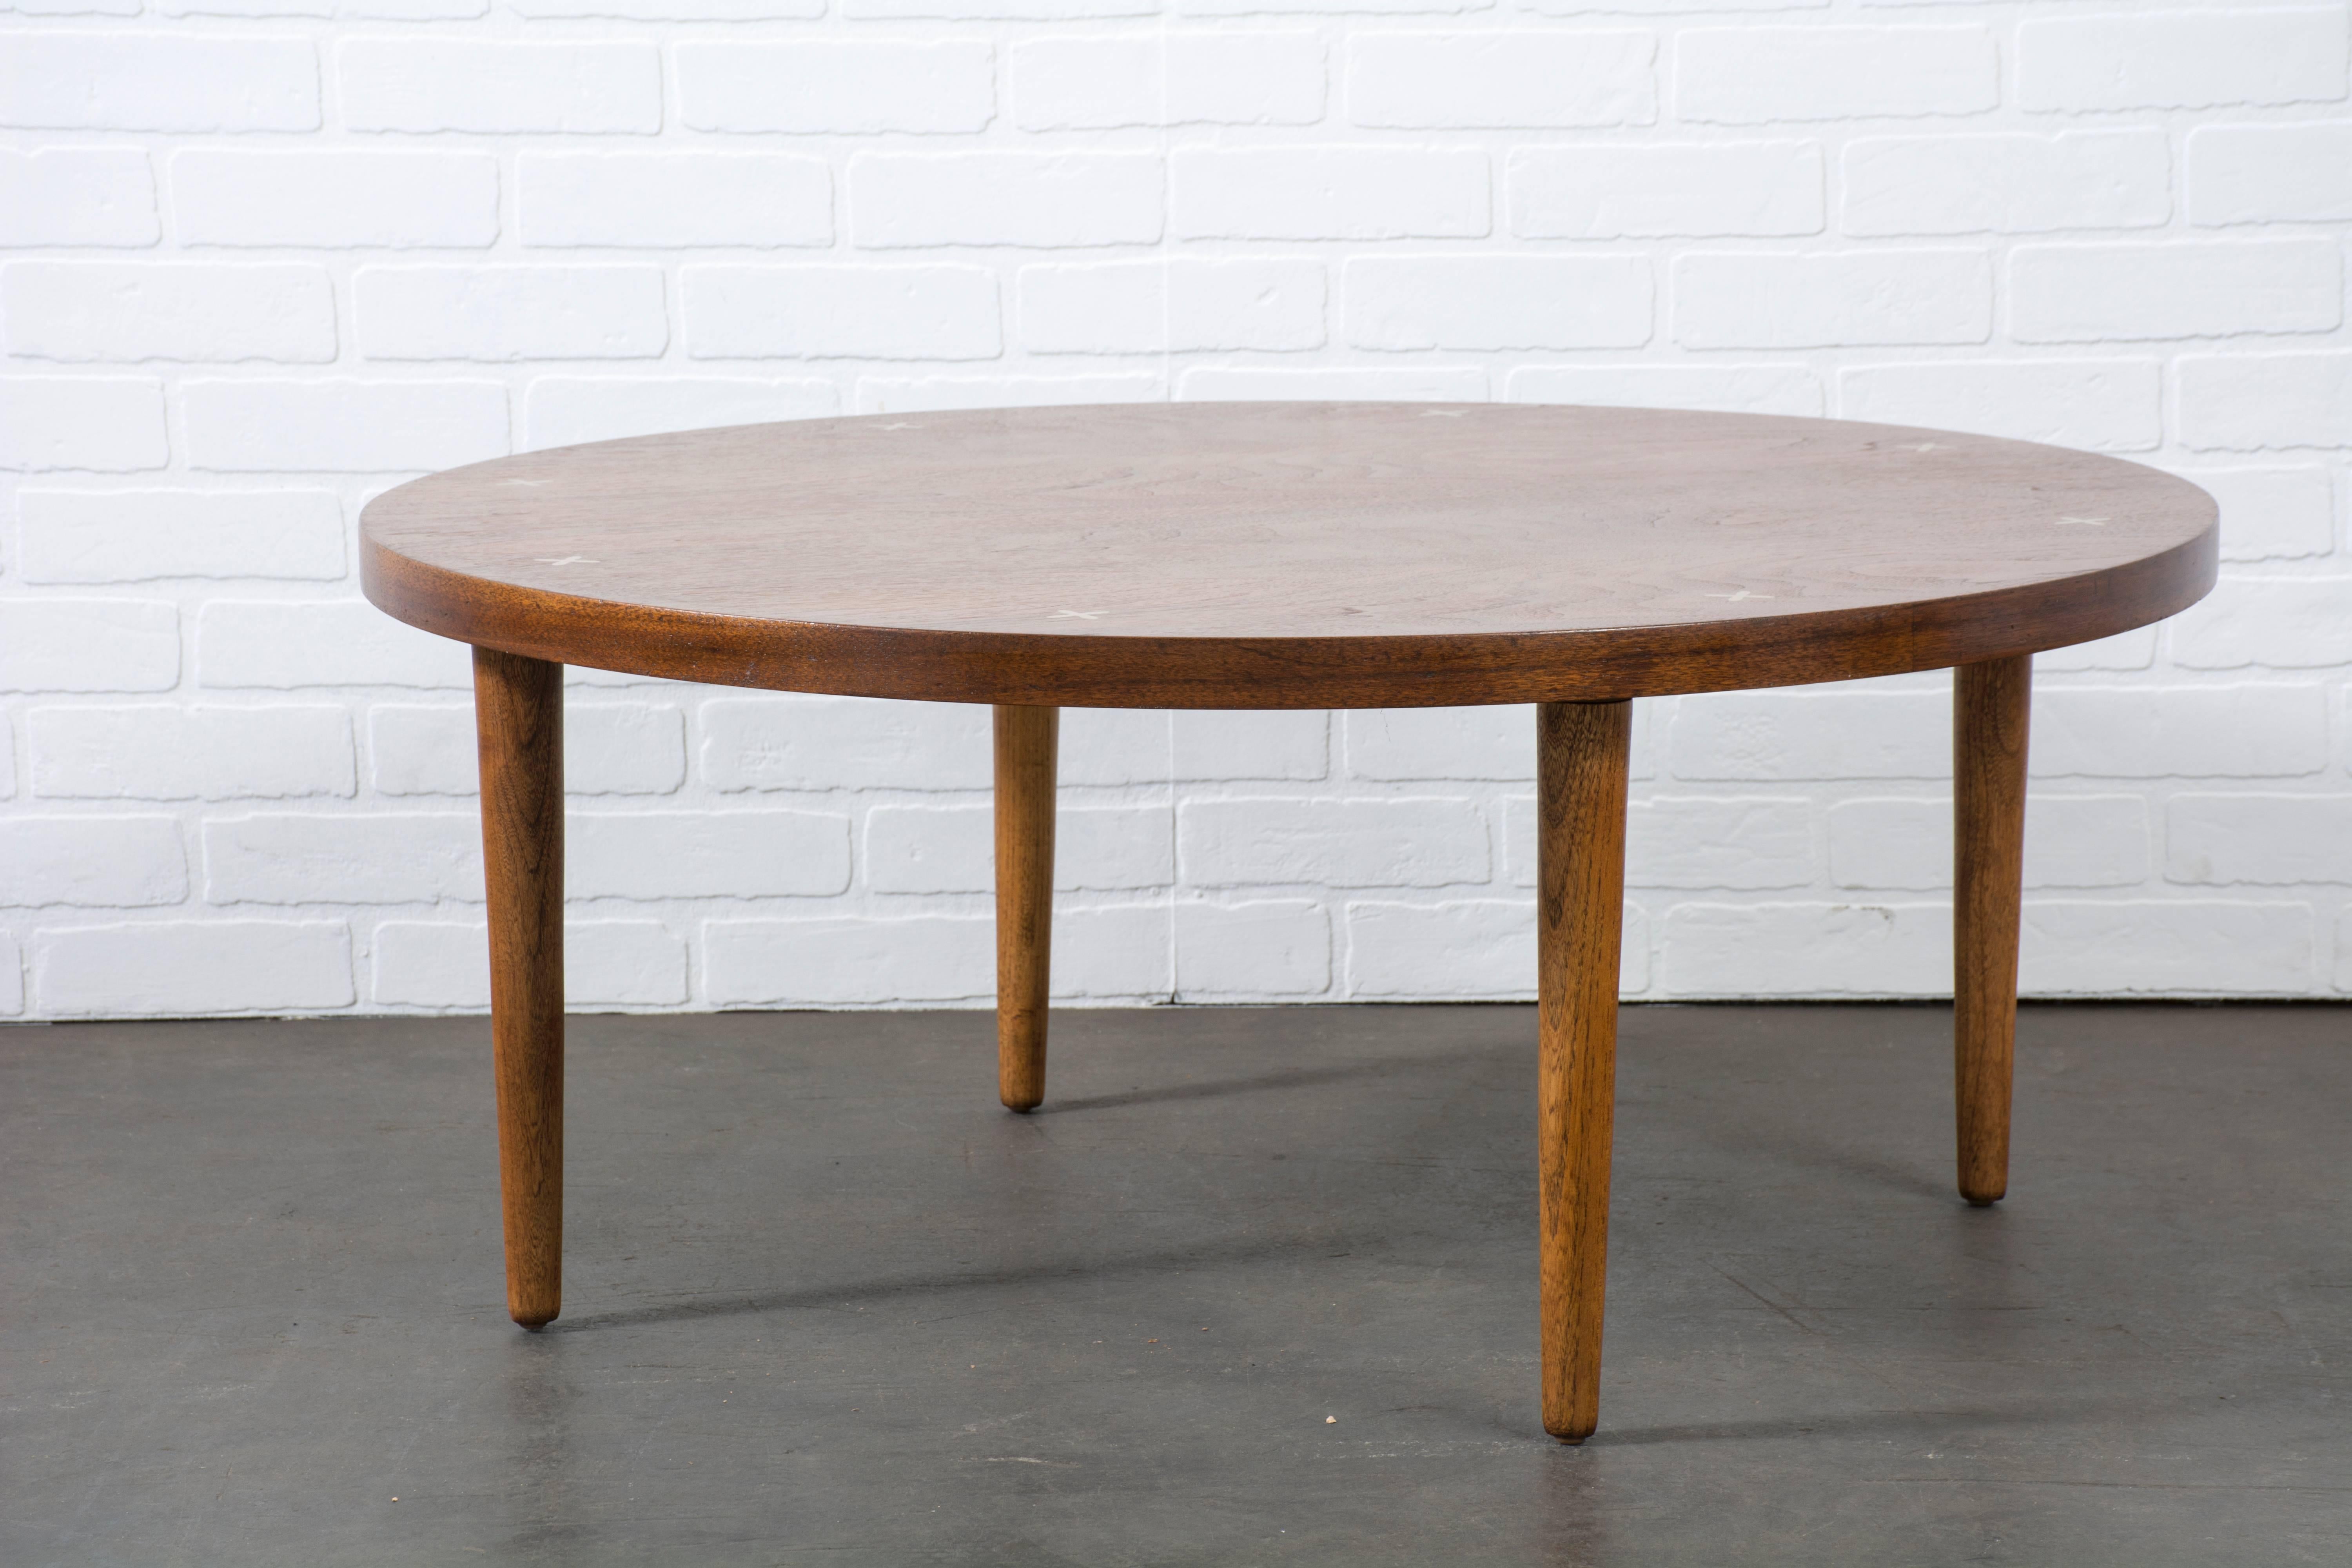 This is a vintage Mid-Century round walnut coffee table by American of Martinsville.